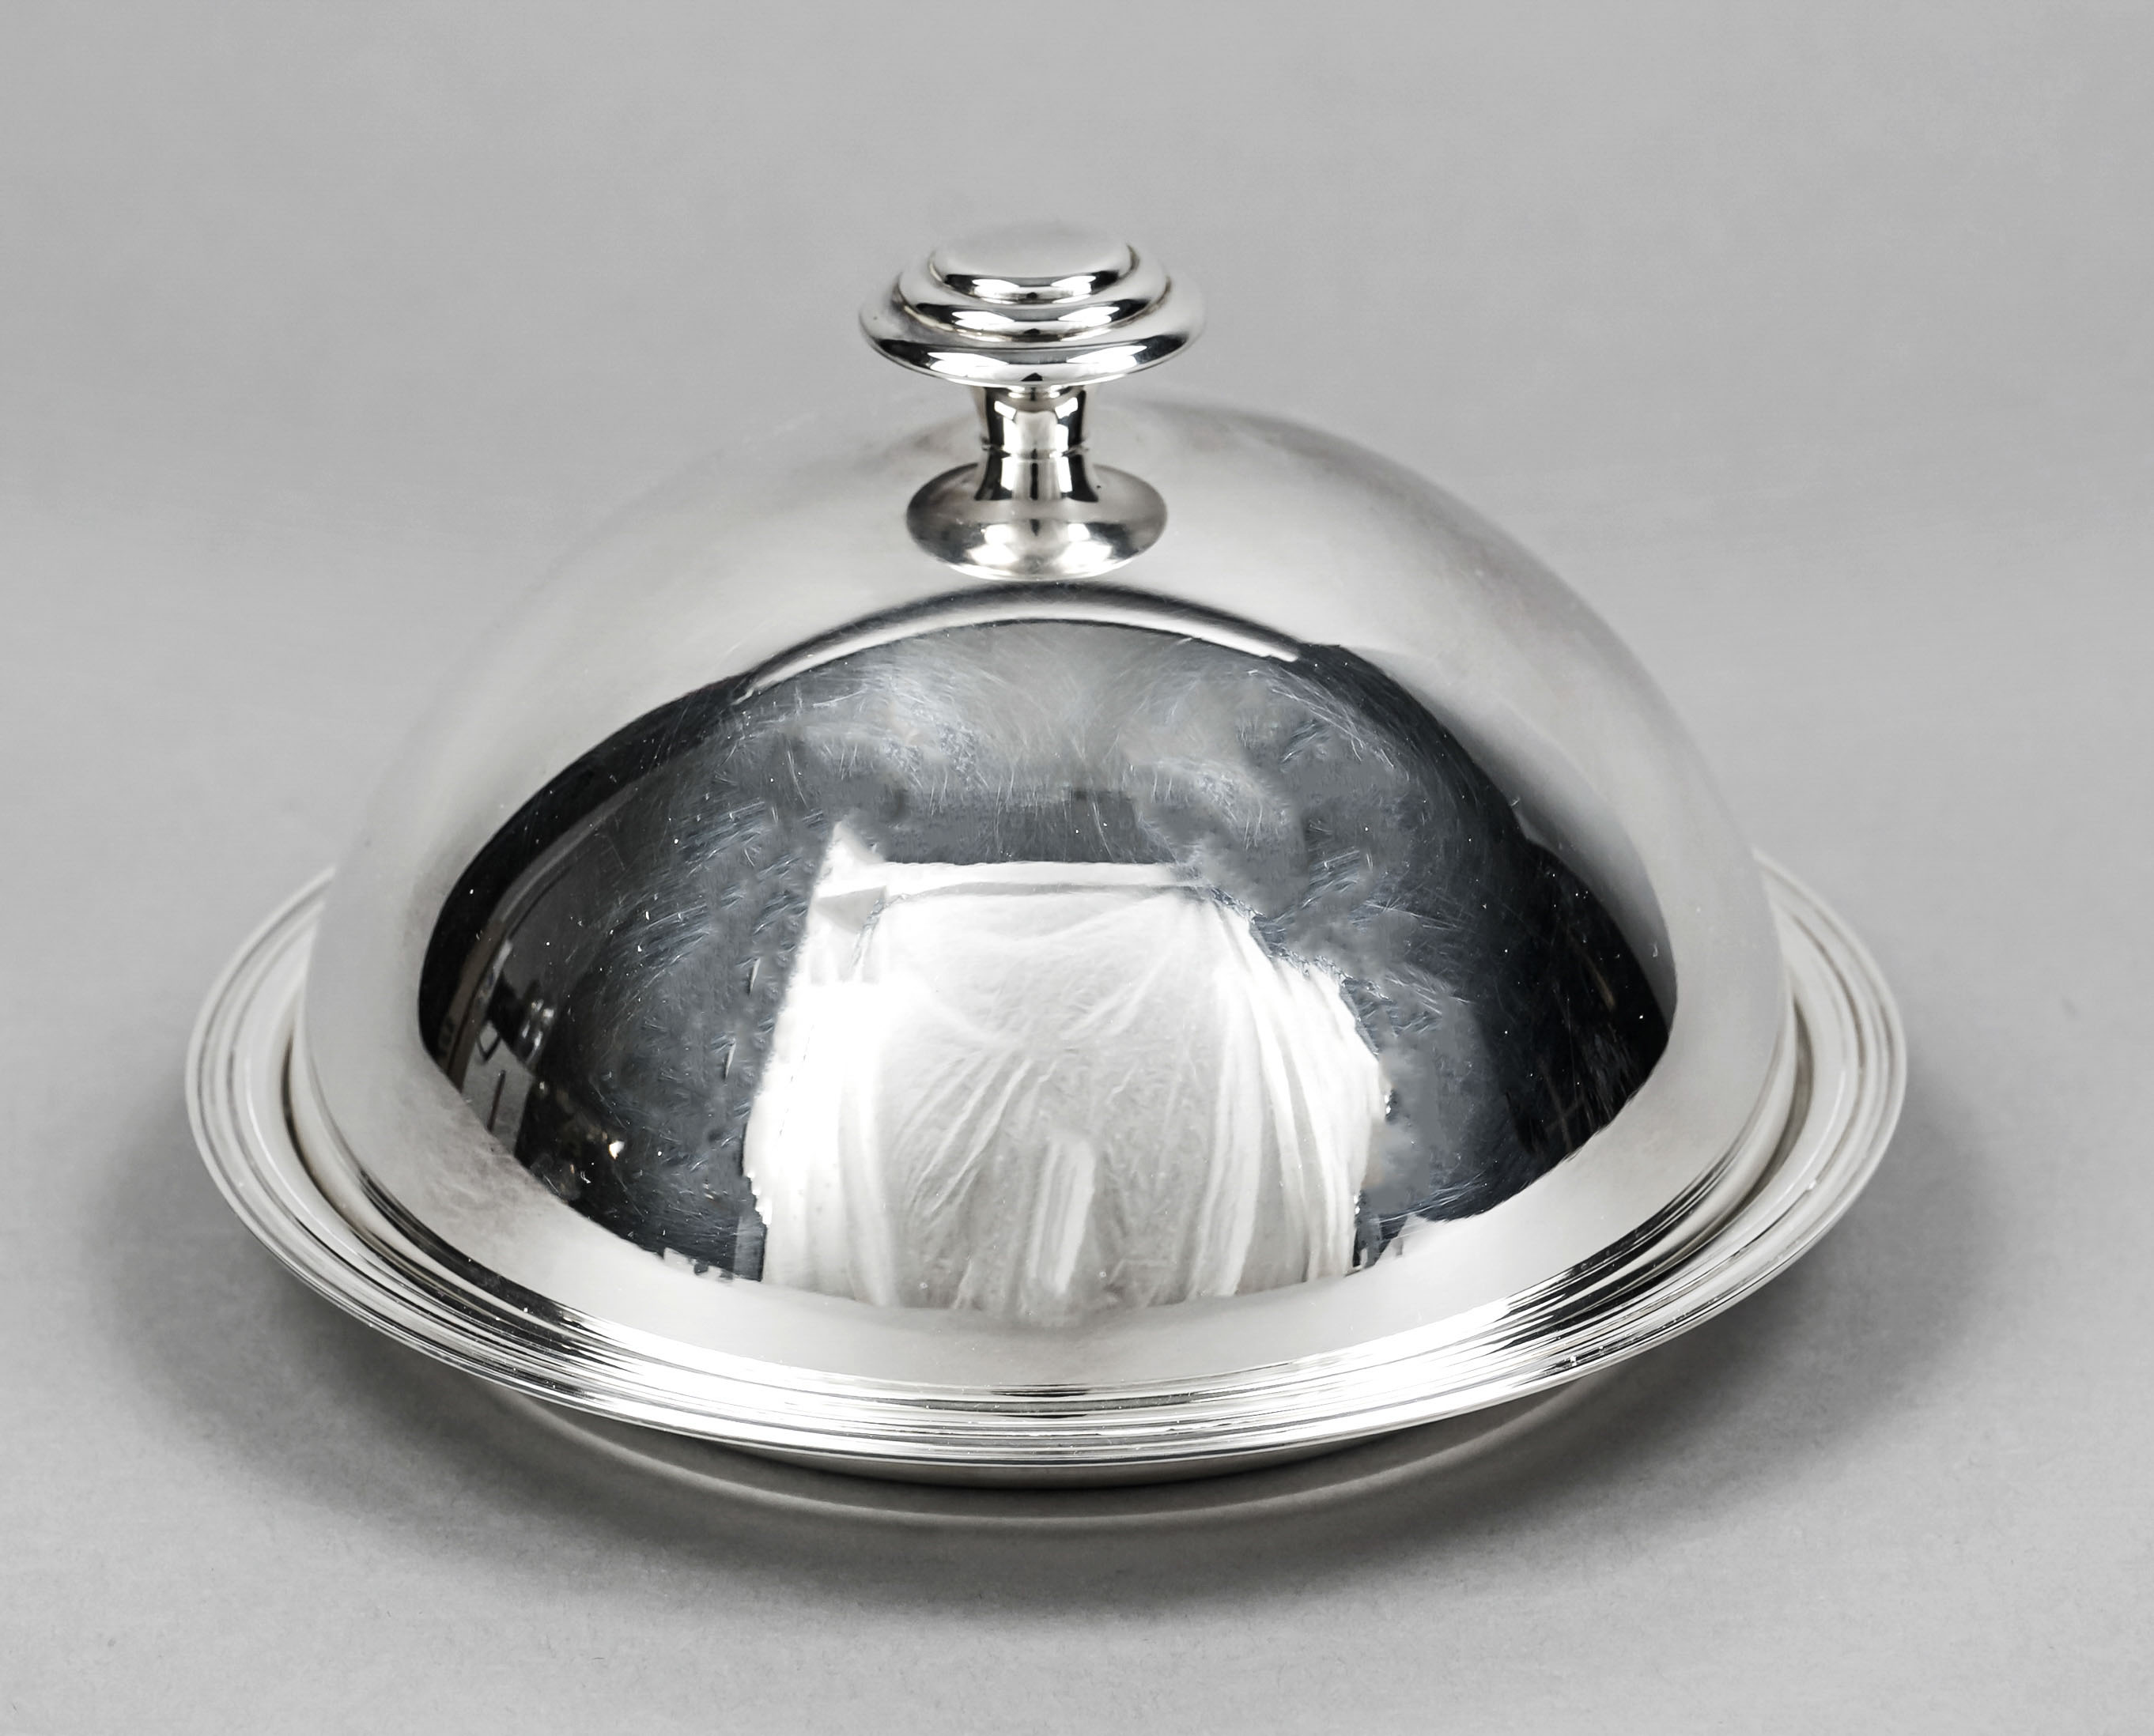 Round butter dish, France, 2nd half 20th century, master's mark Christofle, Paris, plated, smooth